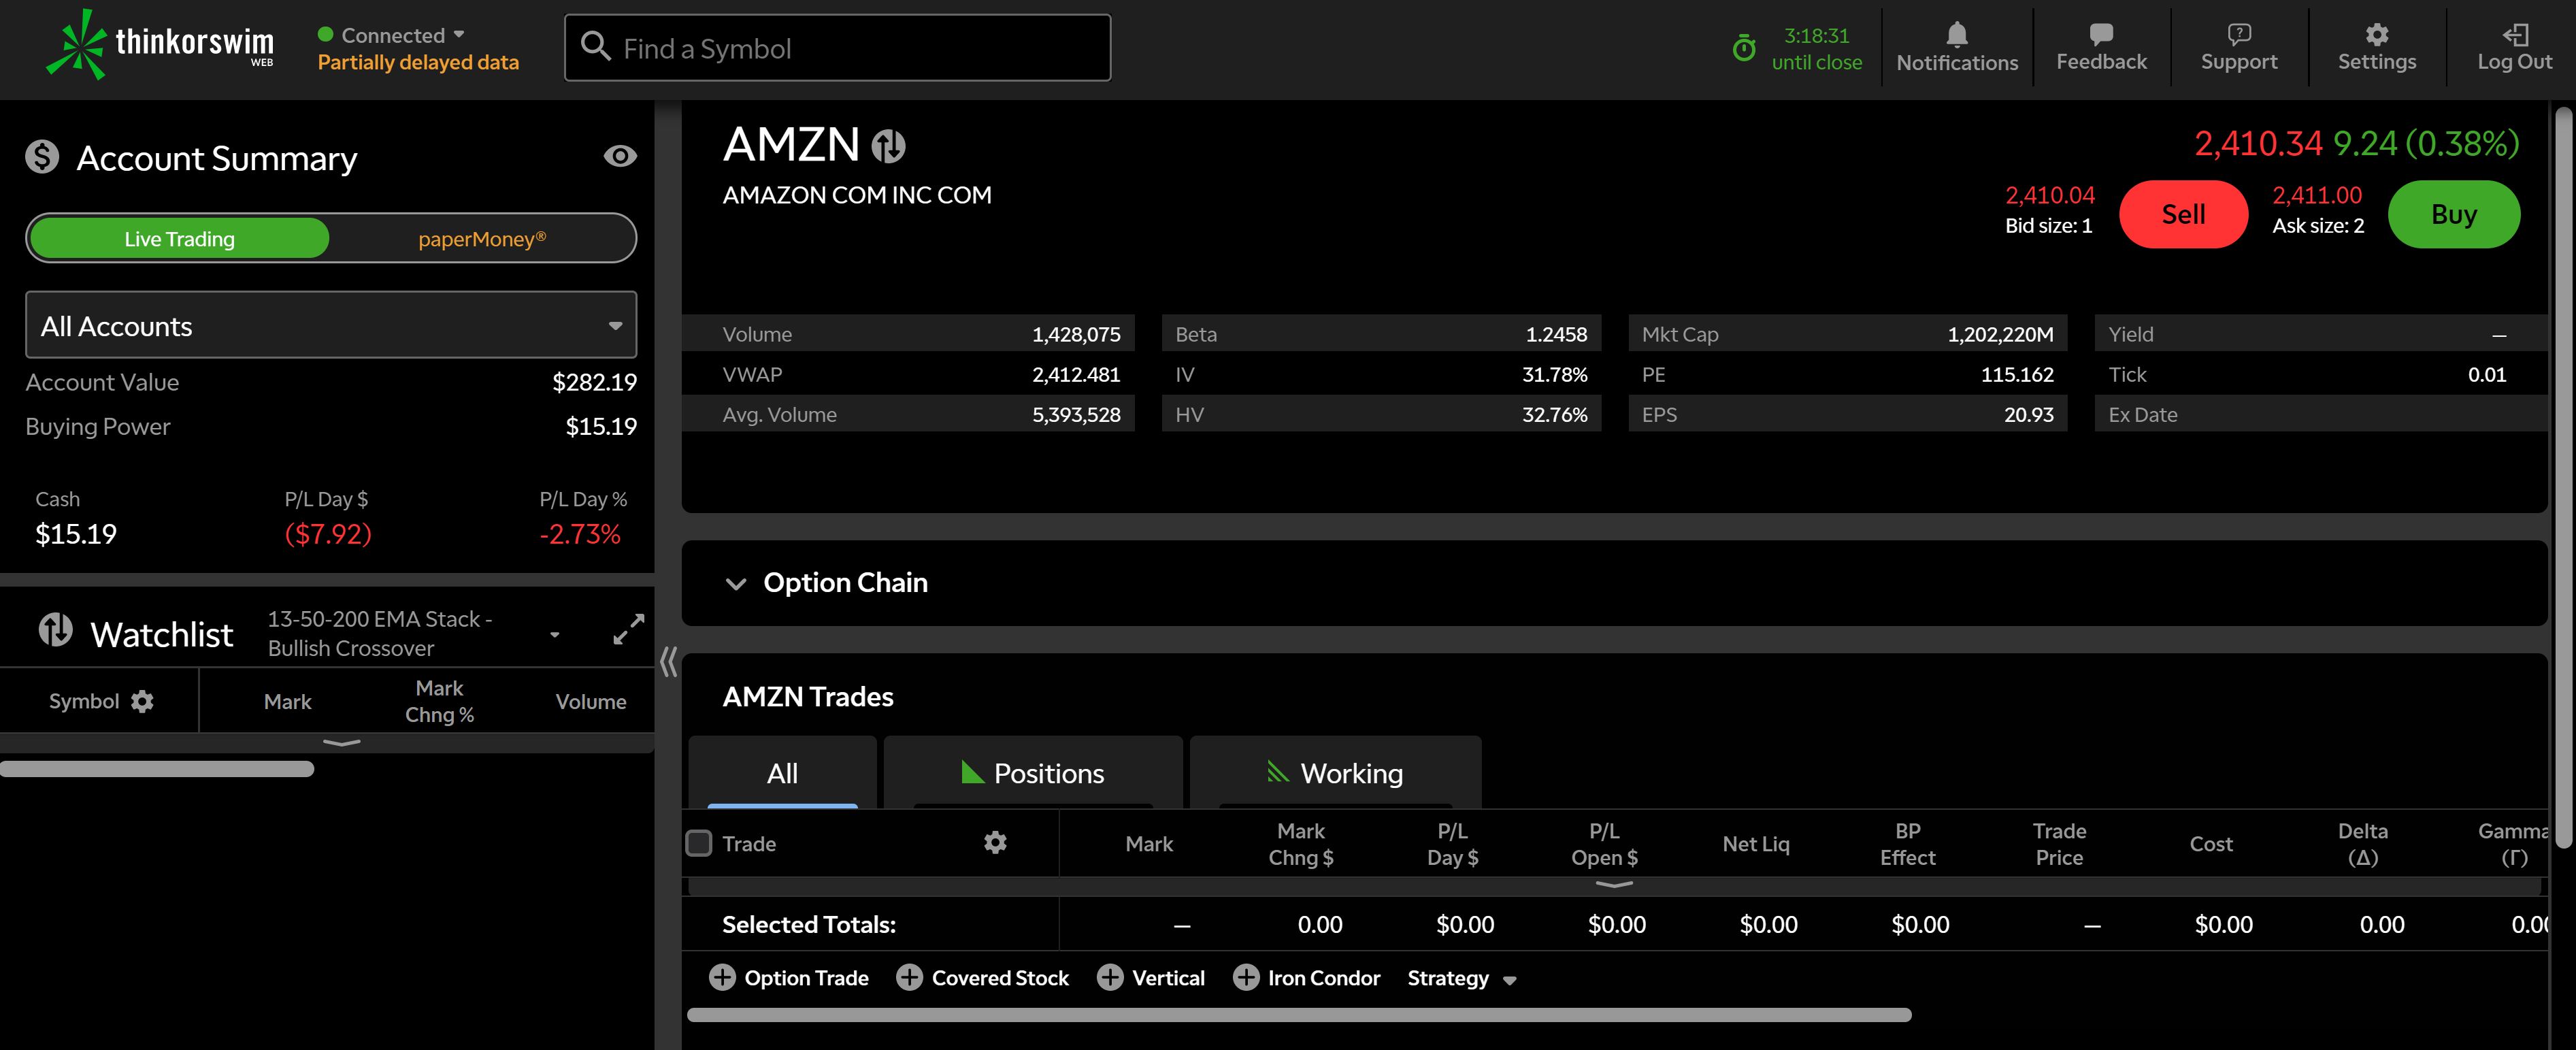 TD Ameritrade launches web interface for Thinkorswim ...